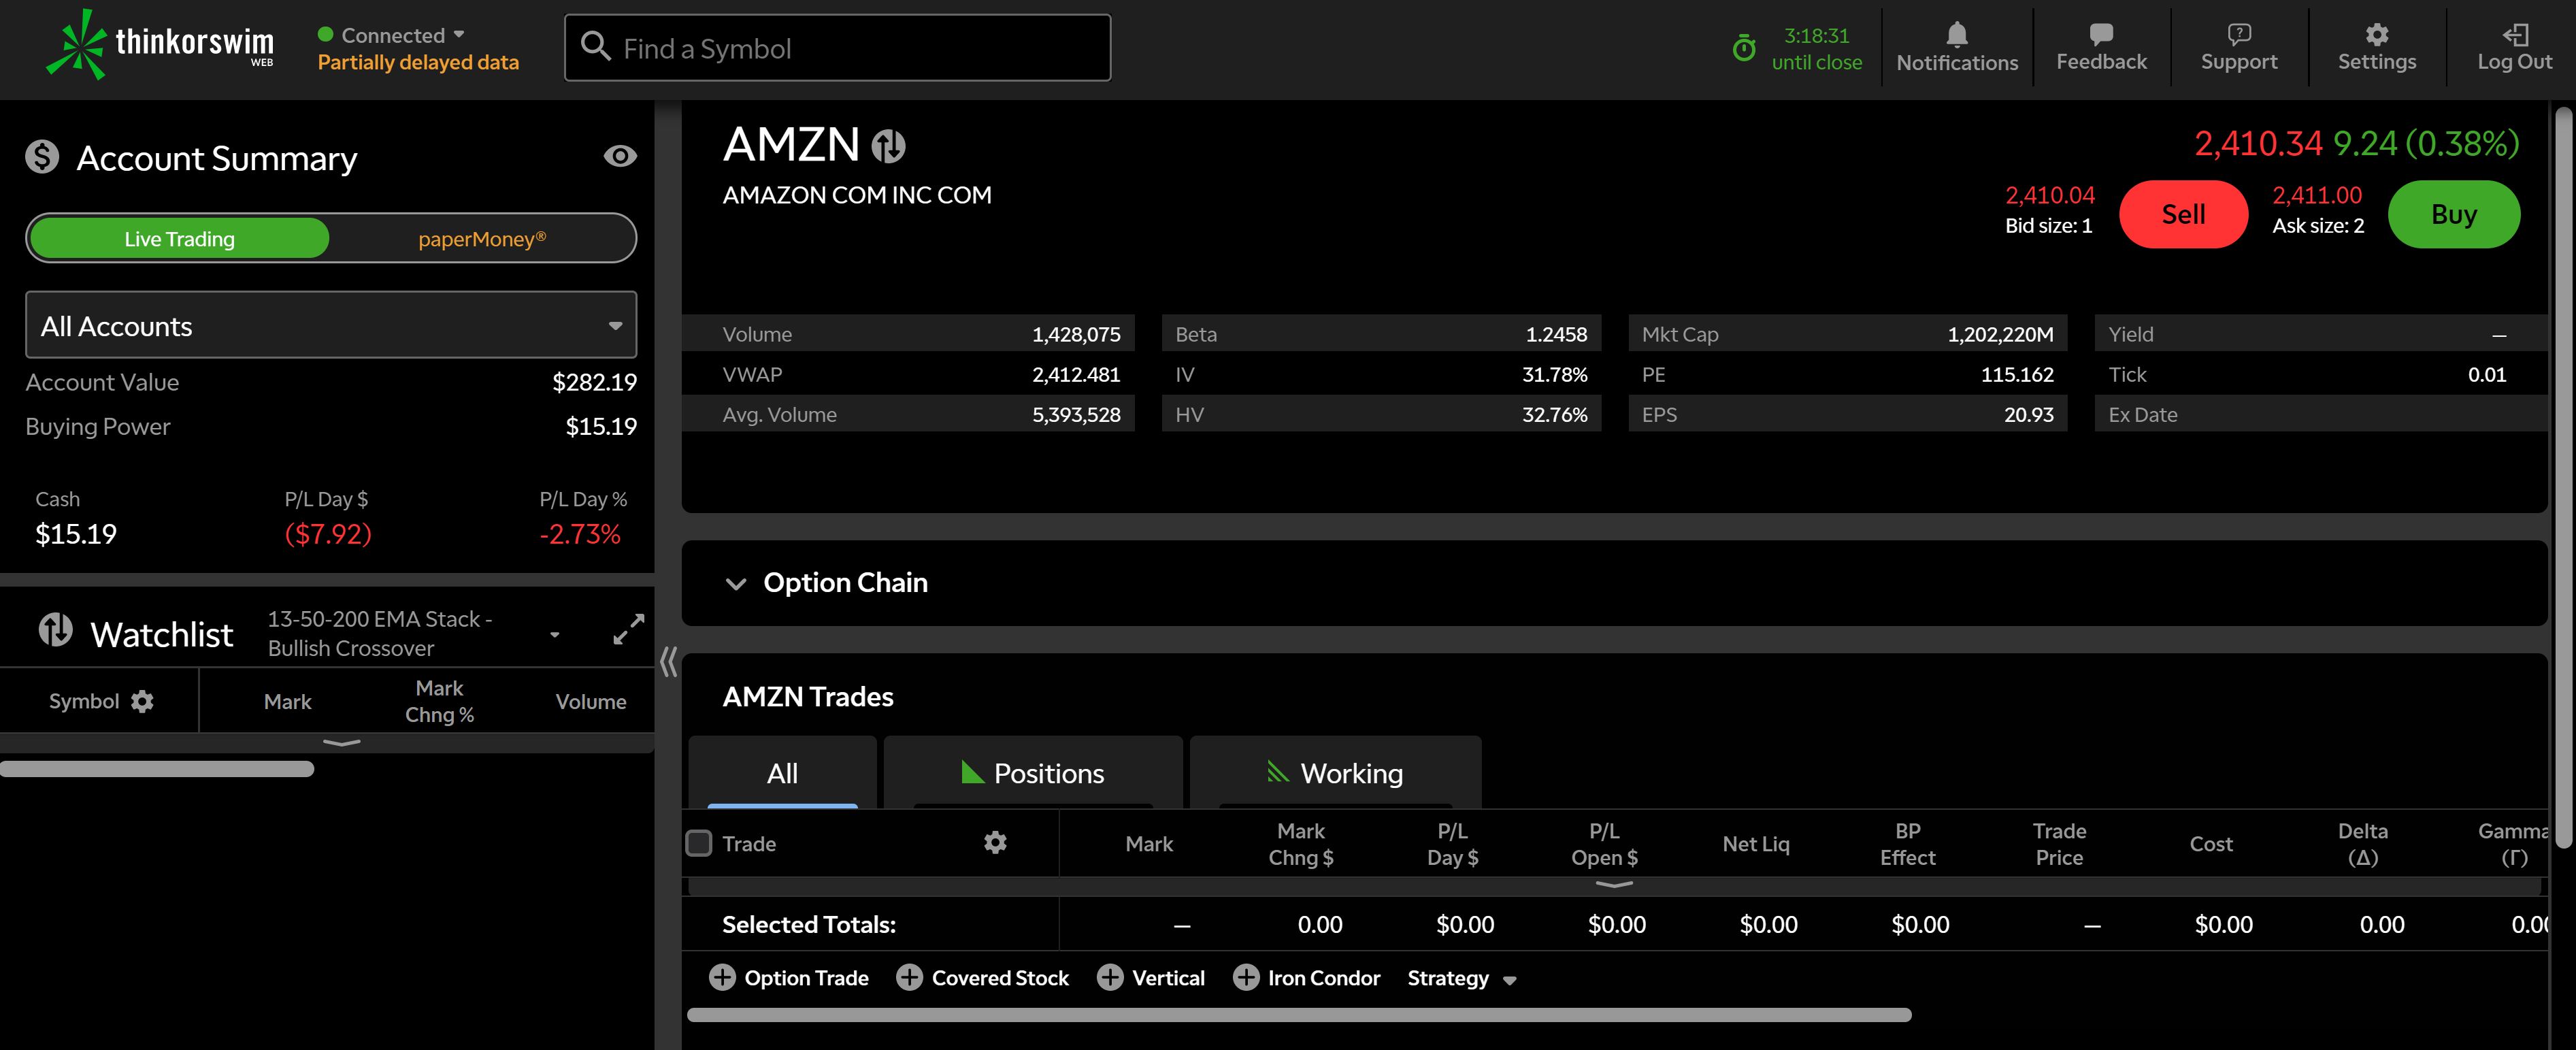 TD Ameritrade launches web interface for Thinkorswim ...